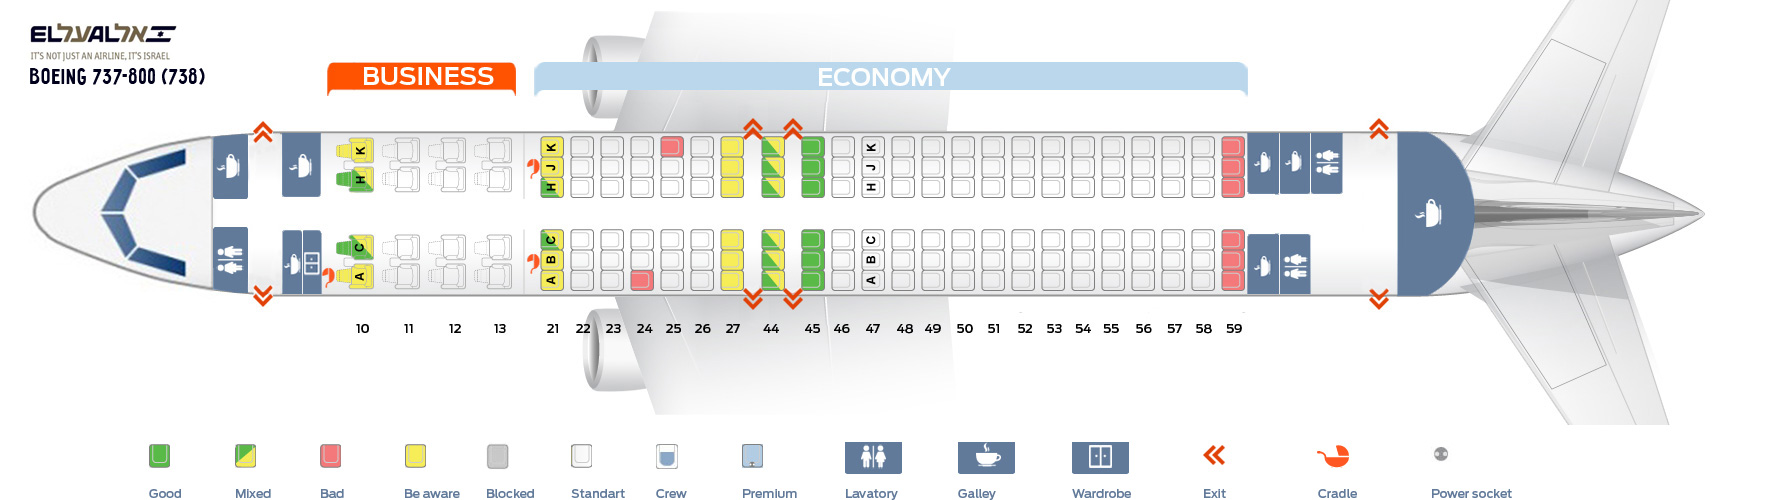 Boeing 738 Seating Chart